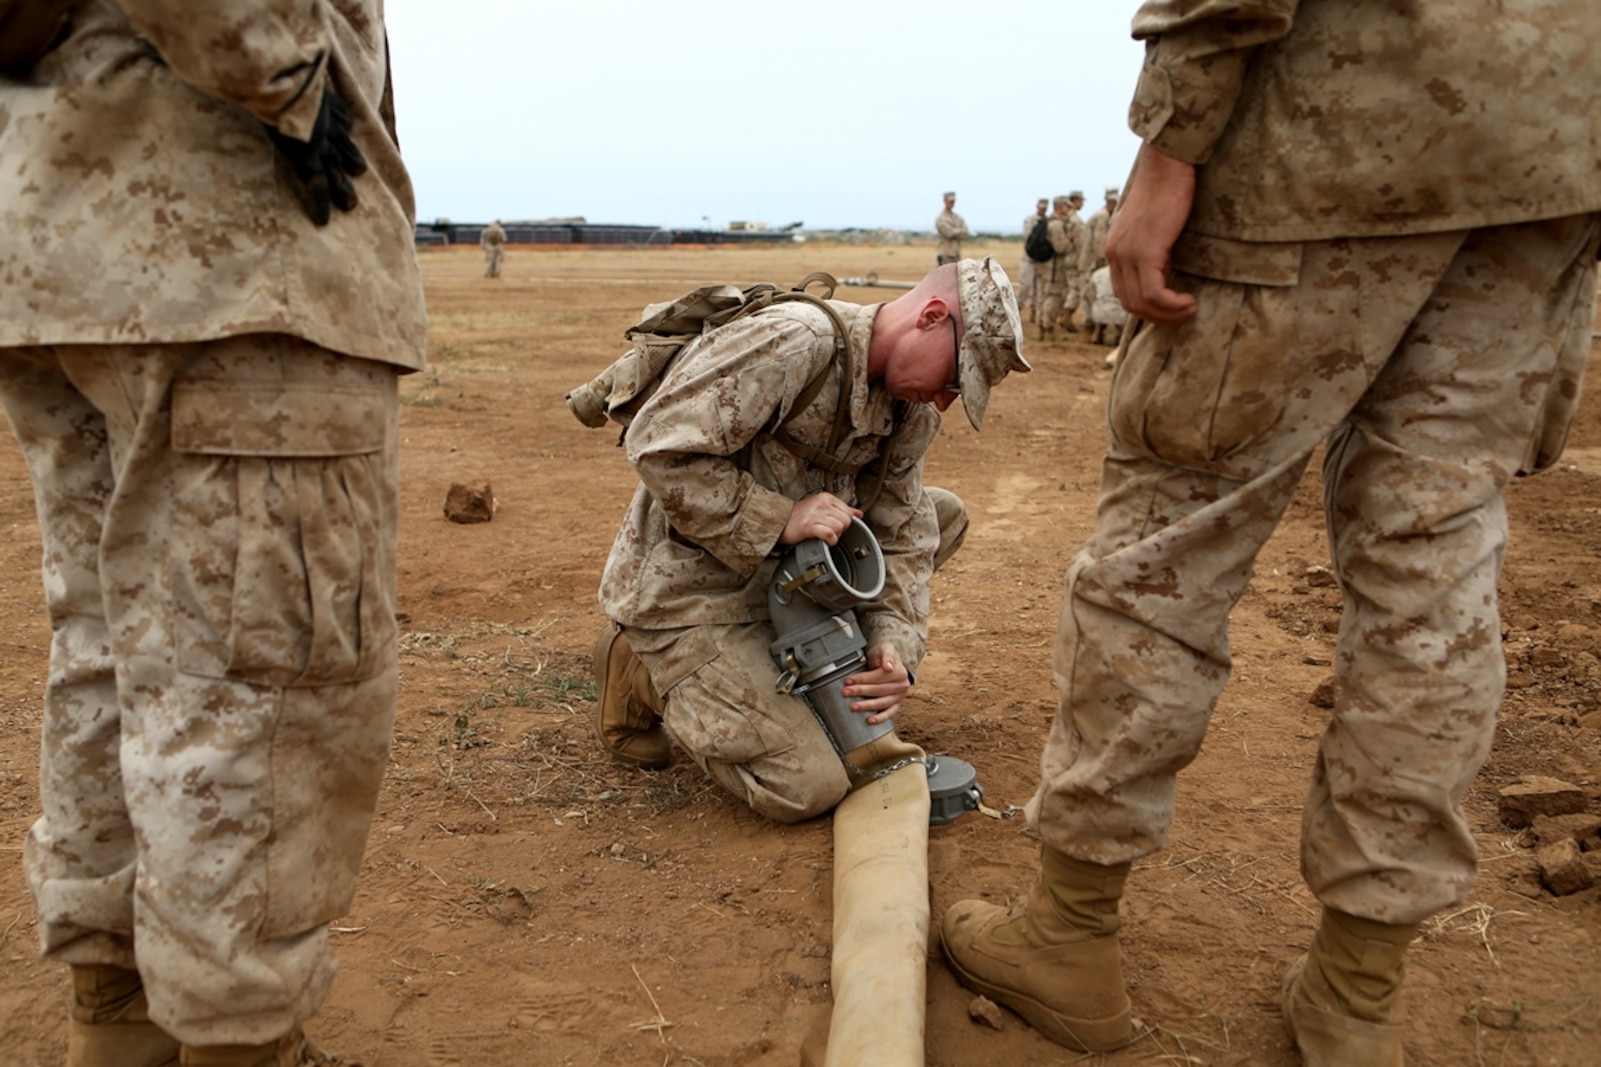 U.S. Marine Lance Cpl. Josh Allen affixes a connecting elbow to a four-inch discharge hose during an annual training exercise aboard Camp Pendleton, Calif., June 13, 2016 to increase readiness and fulfill yearly requirements as a reserve unit. Allen is a water purification specialist with Engineer Support Company, 6th Engineer Support Battalion, 4th Marine Logistics Group. 7th ESB supported their reserve counterparts with the gear necessary to pump water nearly 3 miles from the ocean at Red Beach to a training area where they practiced setting up and maintaining massive stores of water. (U.S. Marine Corps photo by Sgt. Carson Gramley/released)